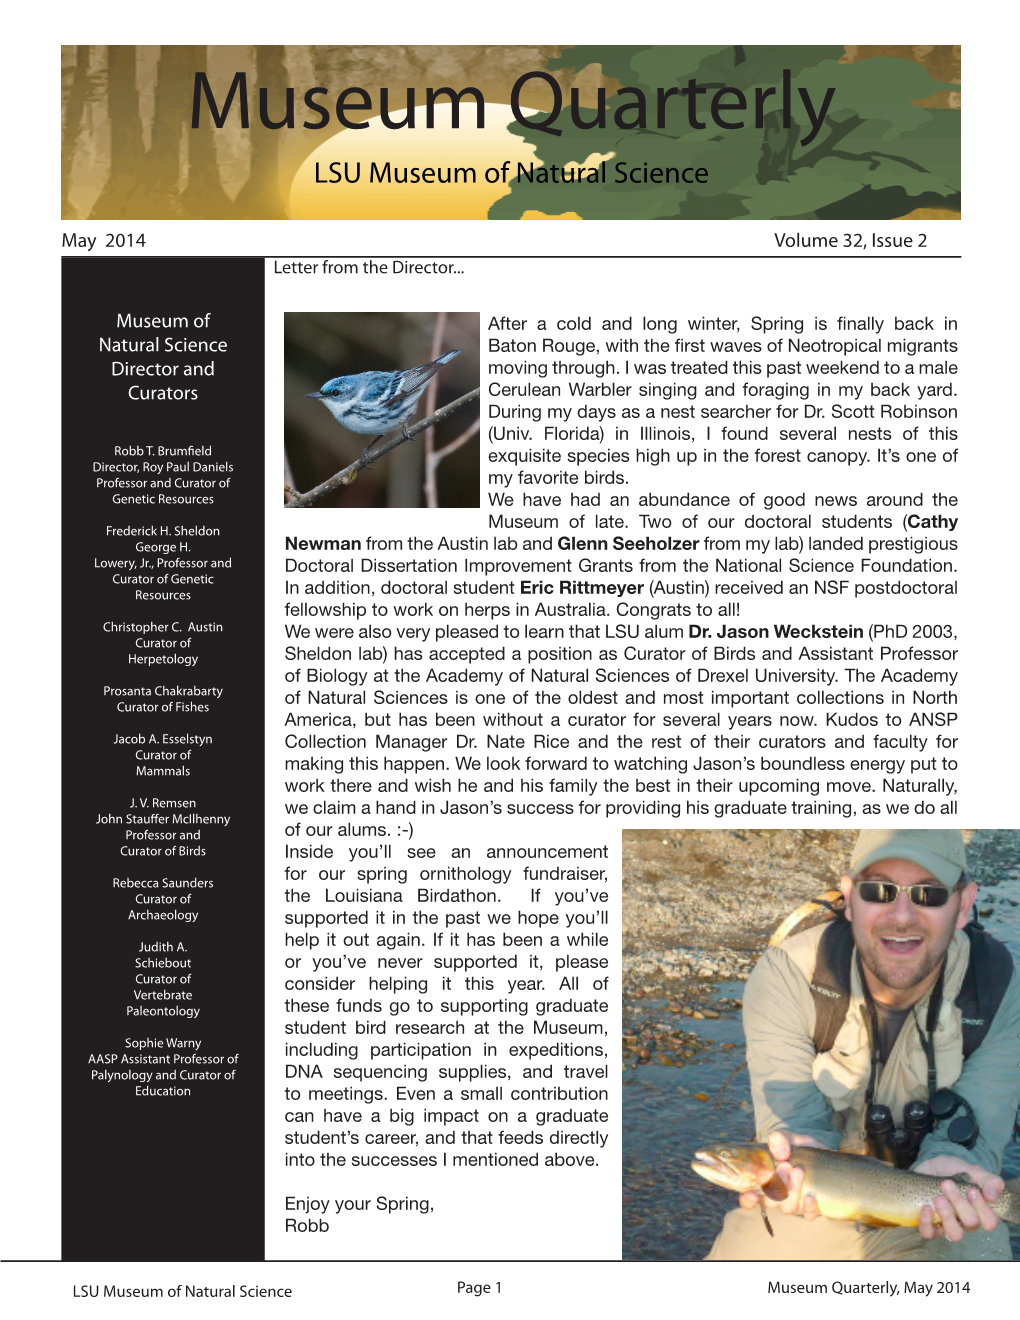 Museum Quarterly Newsletter May 2014